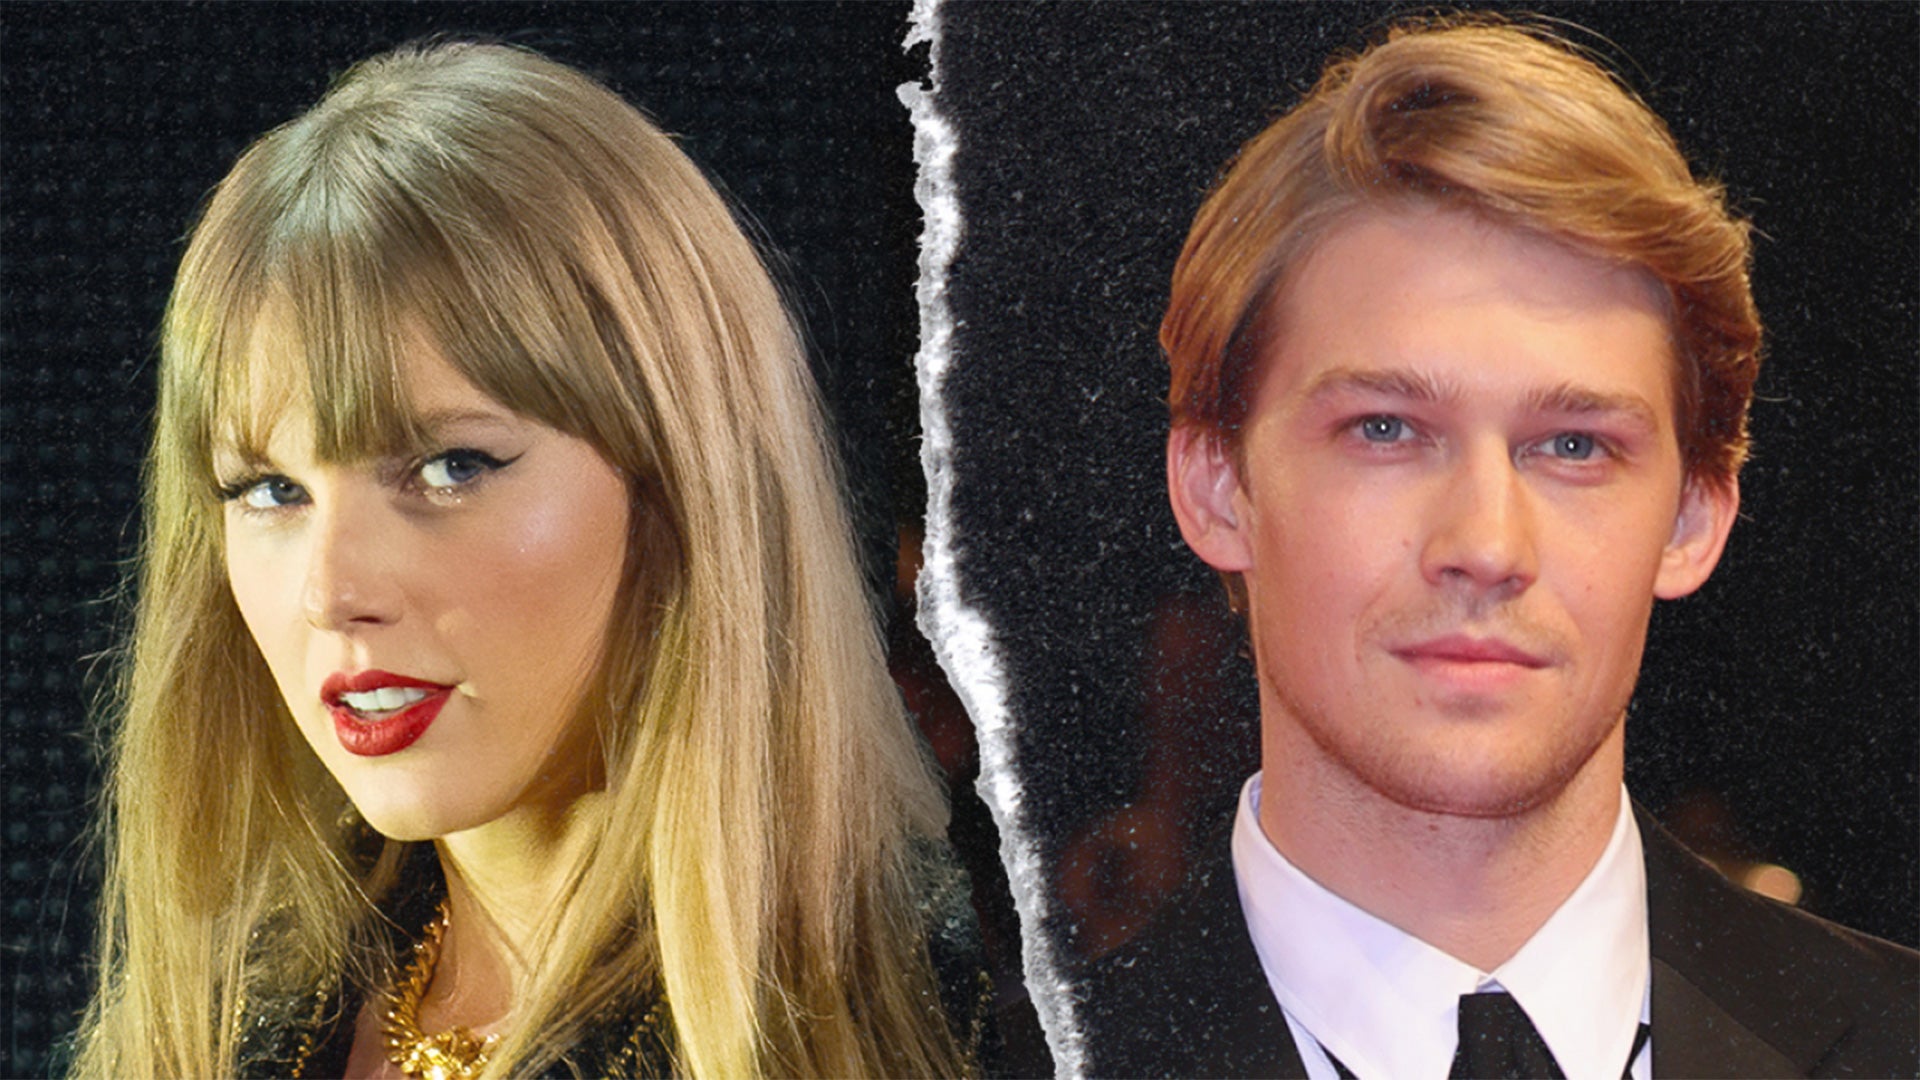 Why Taylor Swift, Joe Alwyn Relationship Private in 'Miss